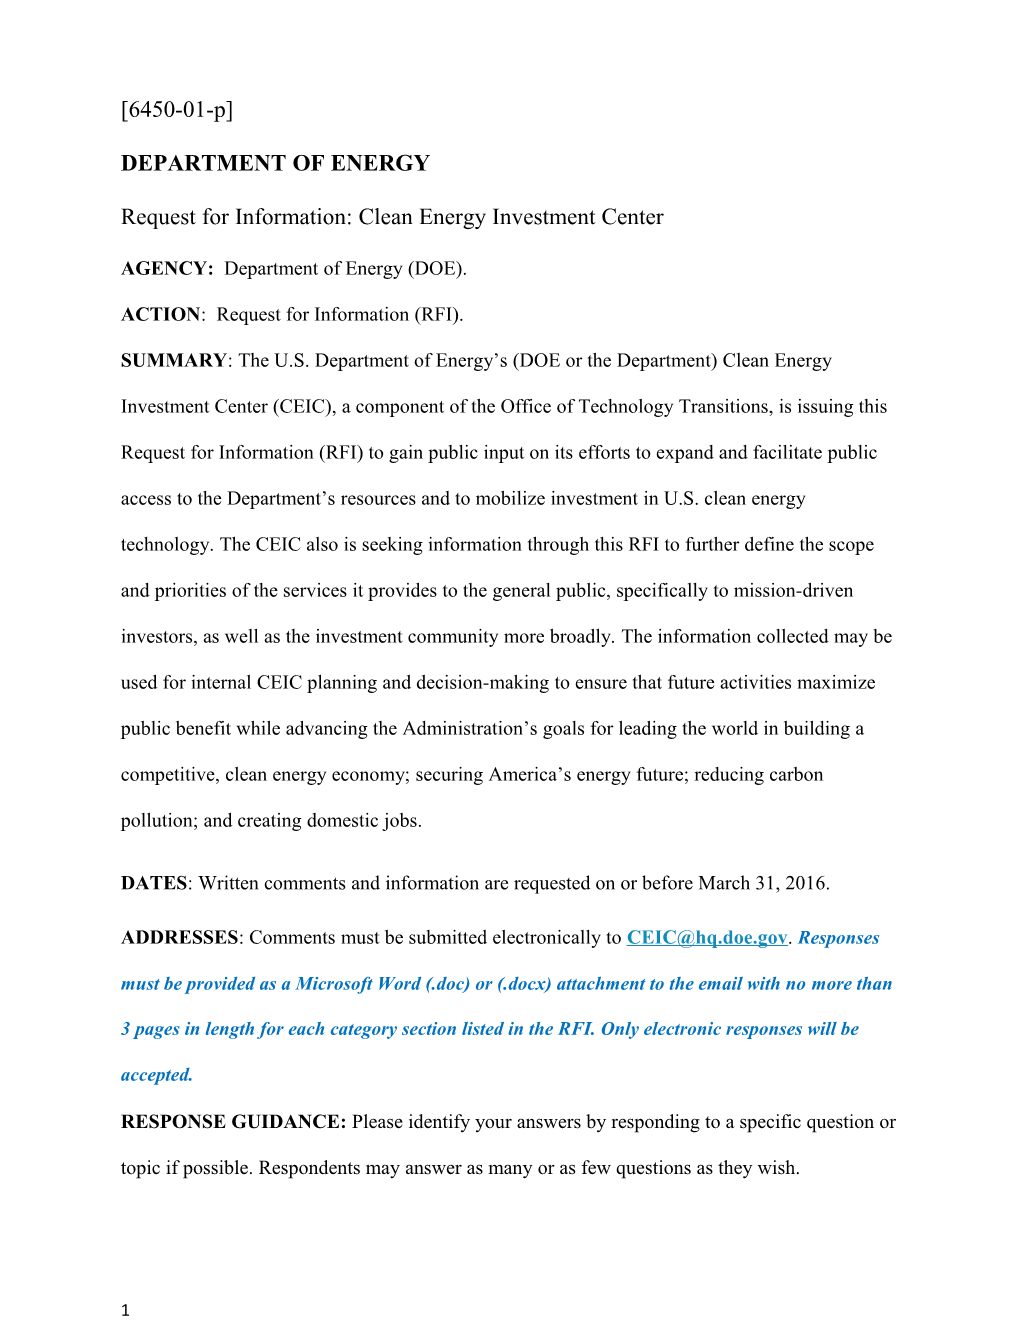 Request for Information:Clean Energy Investment Center